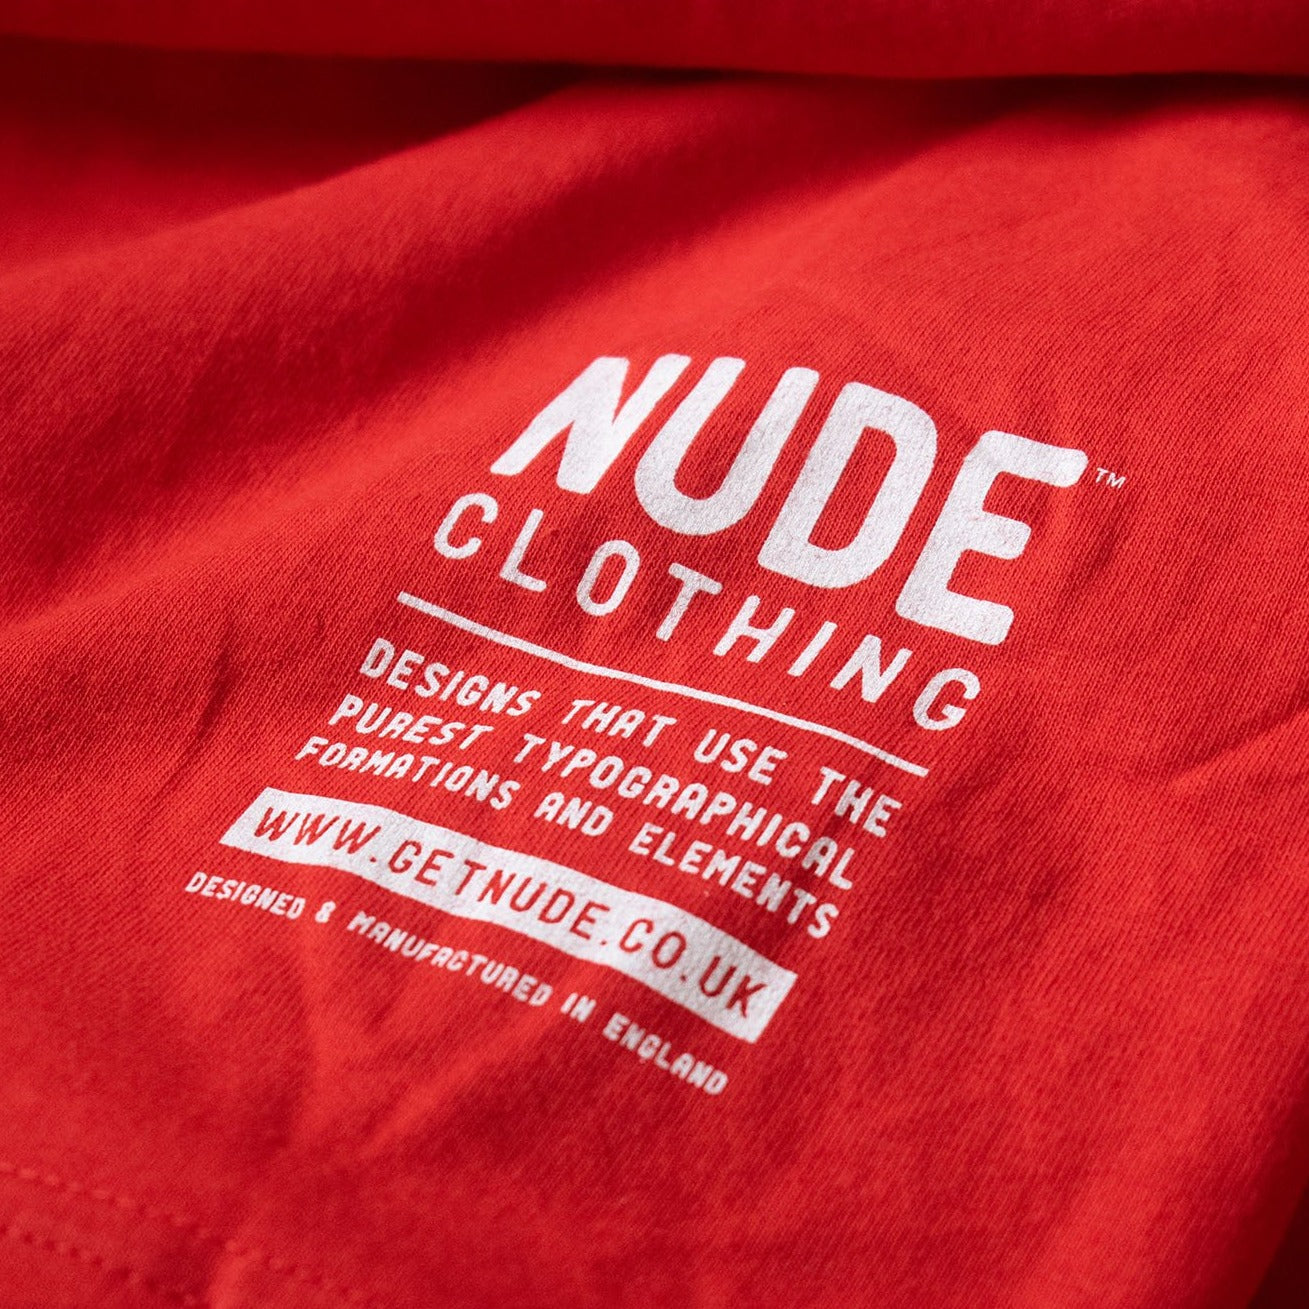 Classic Nude T-Shirt - Red